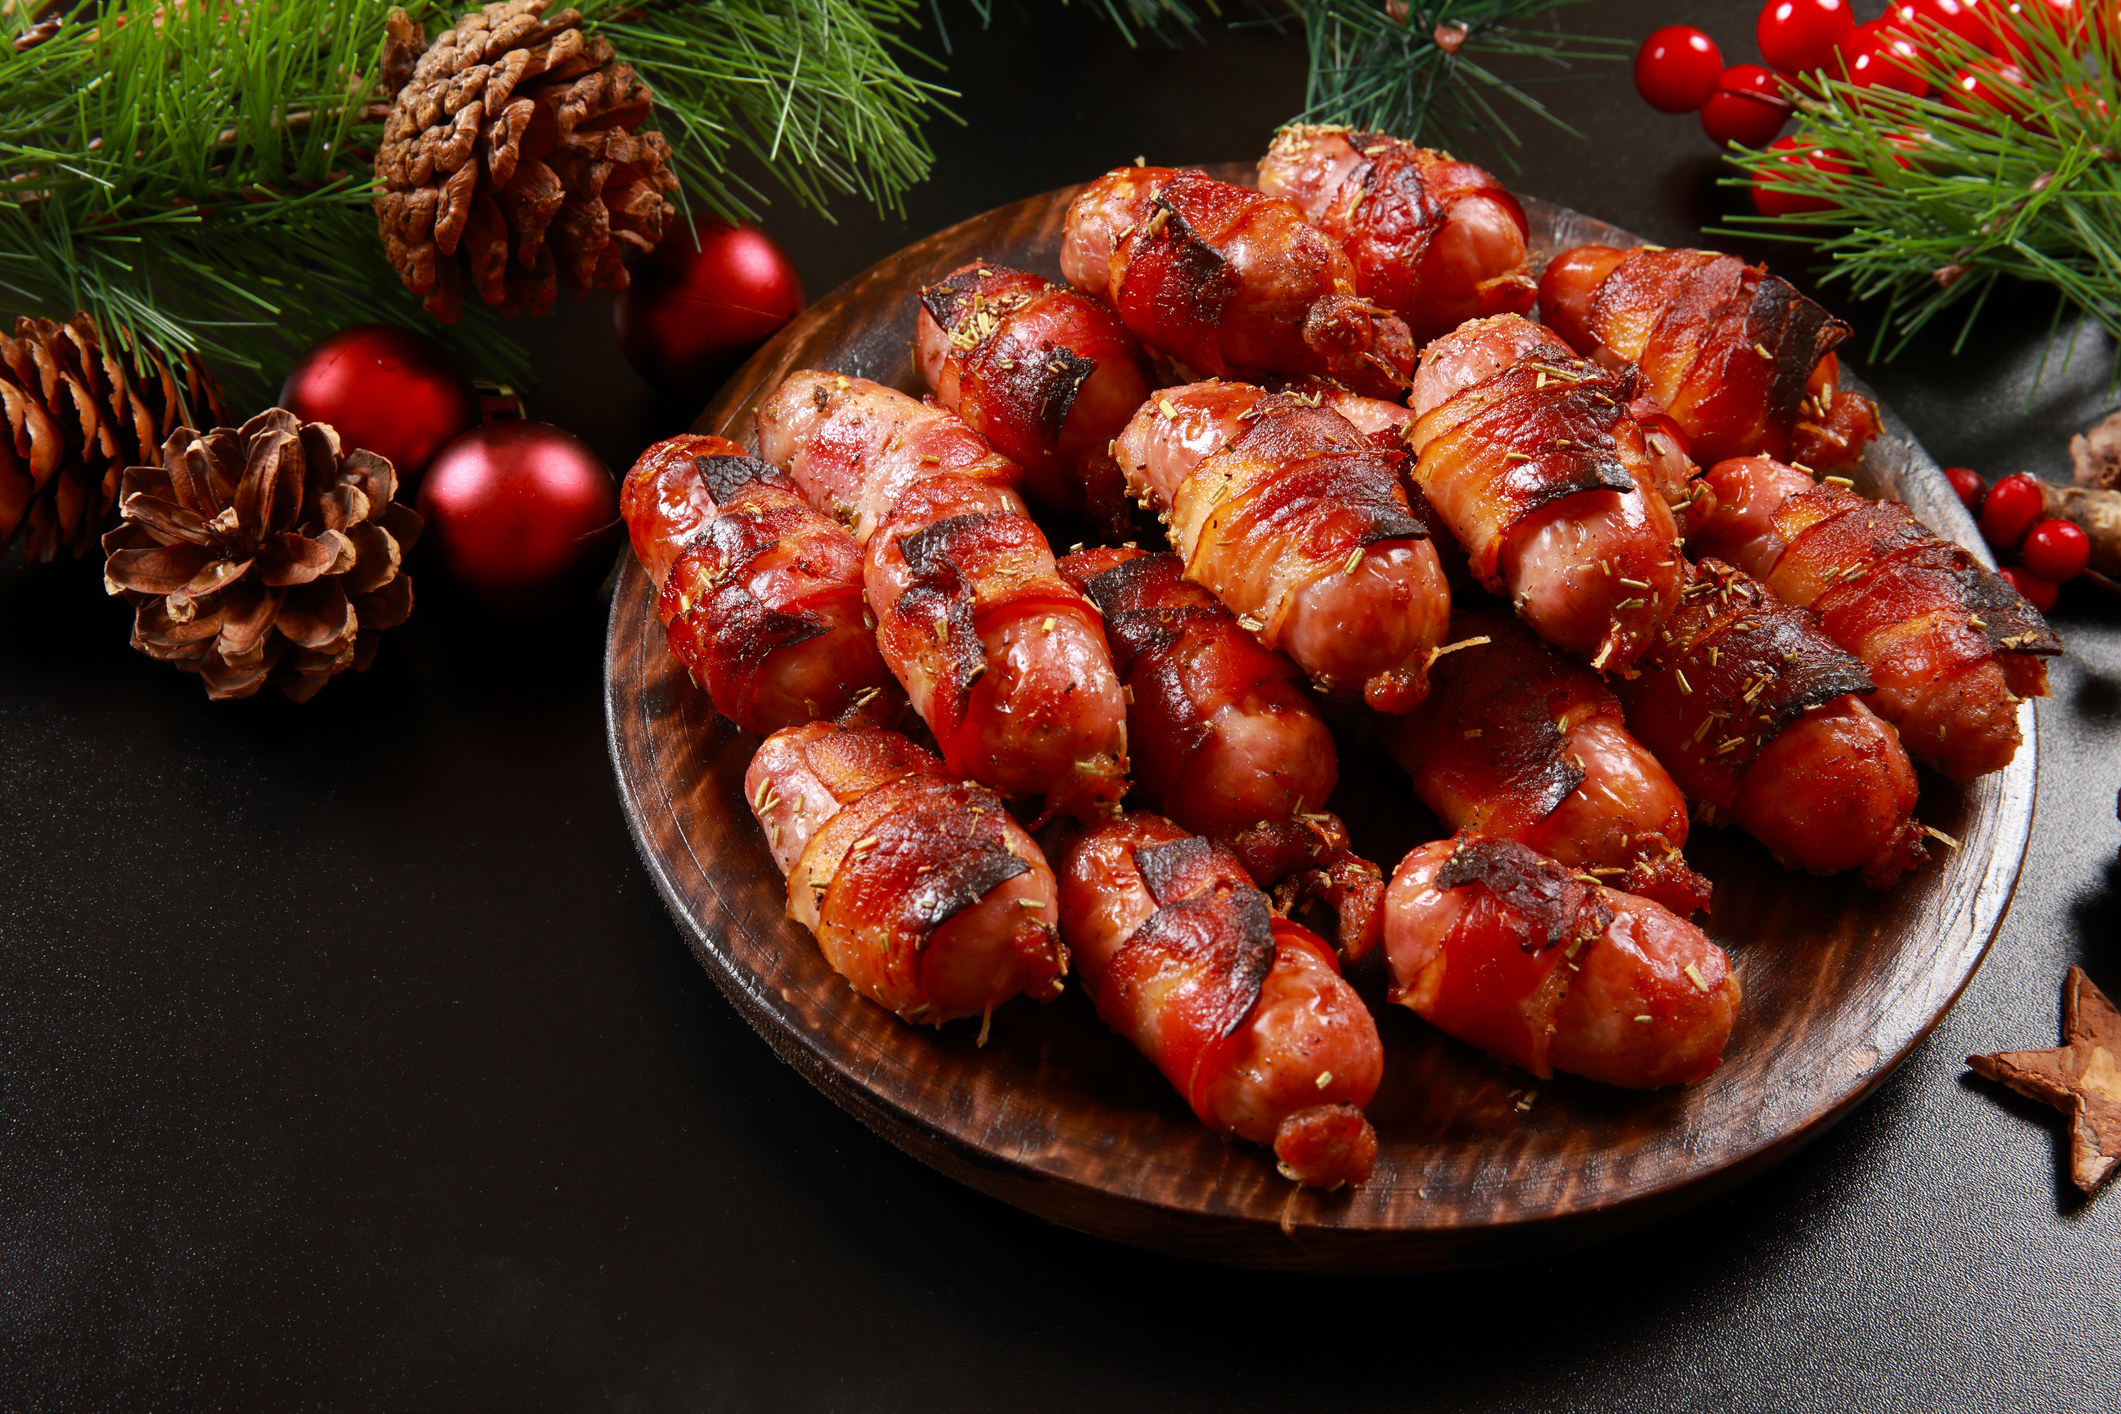 A plate of pigs in blankets (Sausages wrapped in bacon) with pine cones, holy berries and sprigs of tree around it.